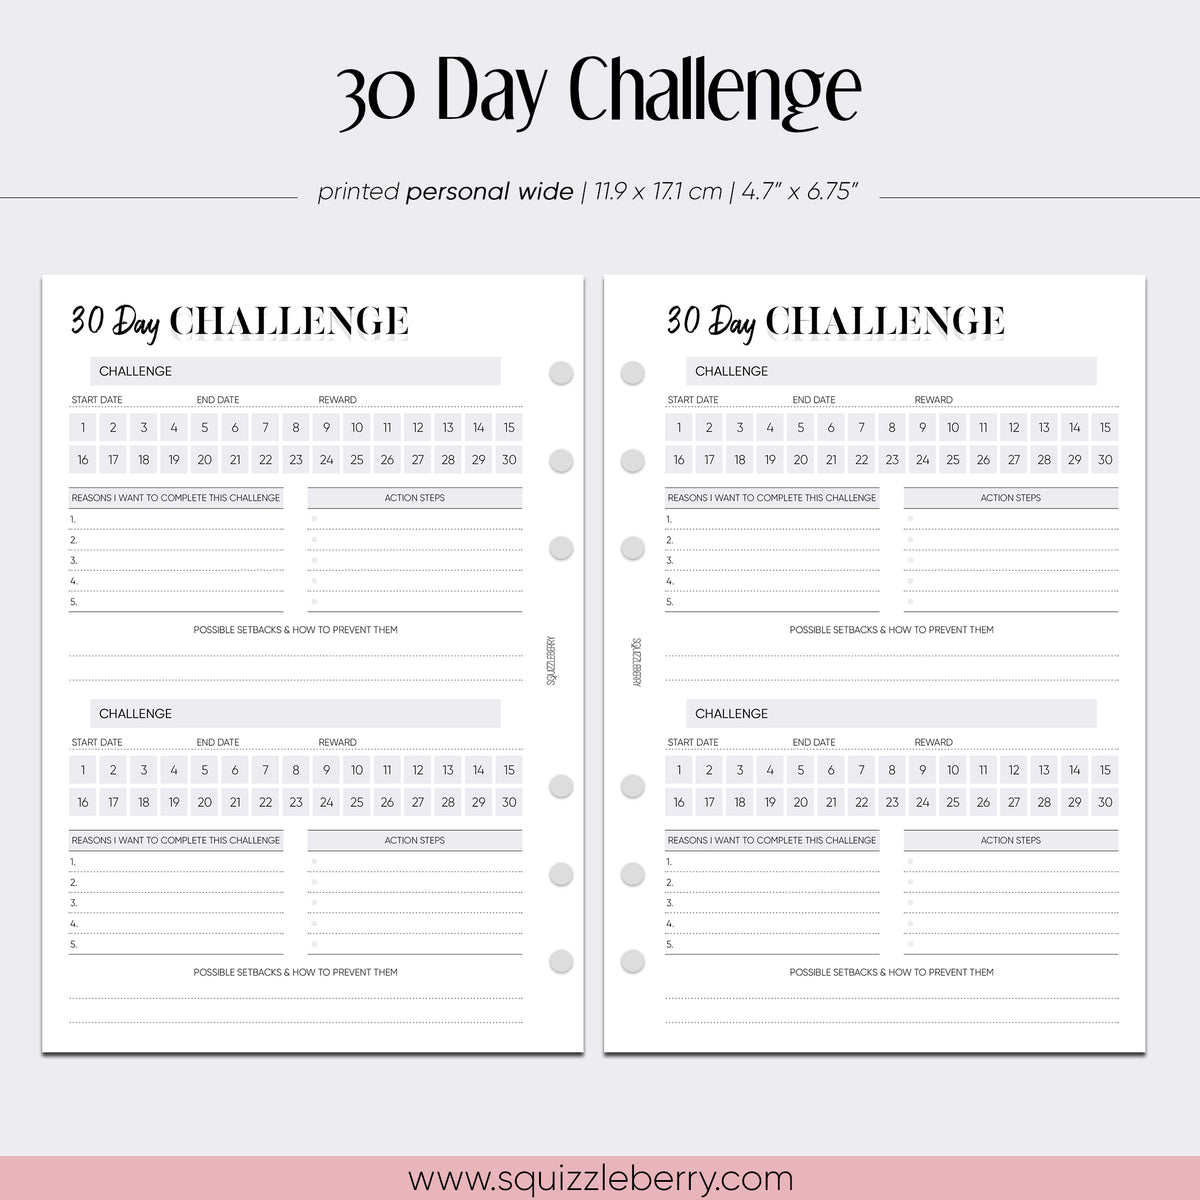 30 Day Challenge - Personal Wide | SquizzleBerry